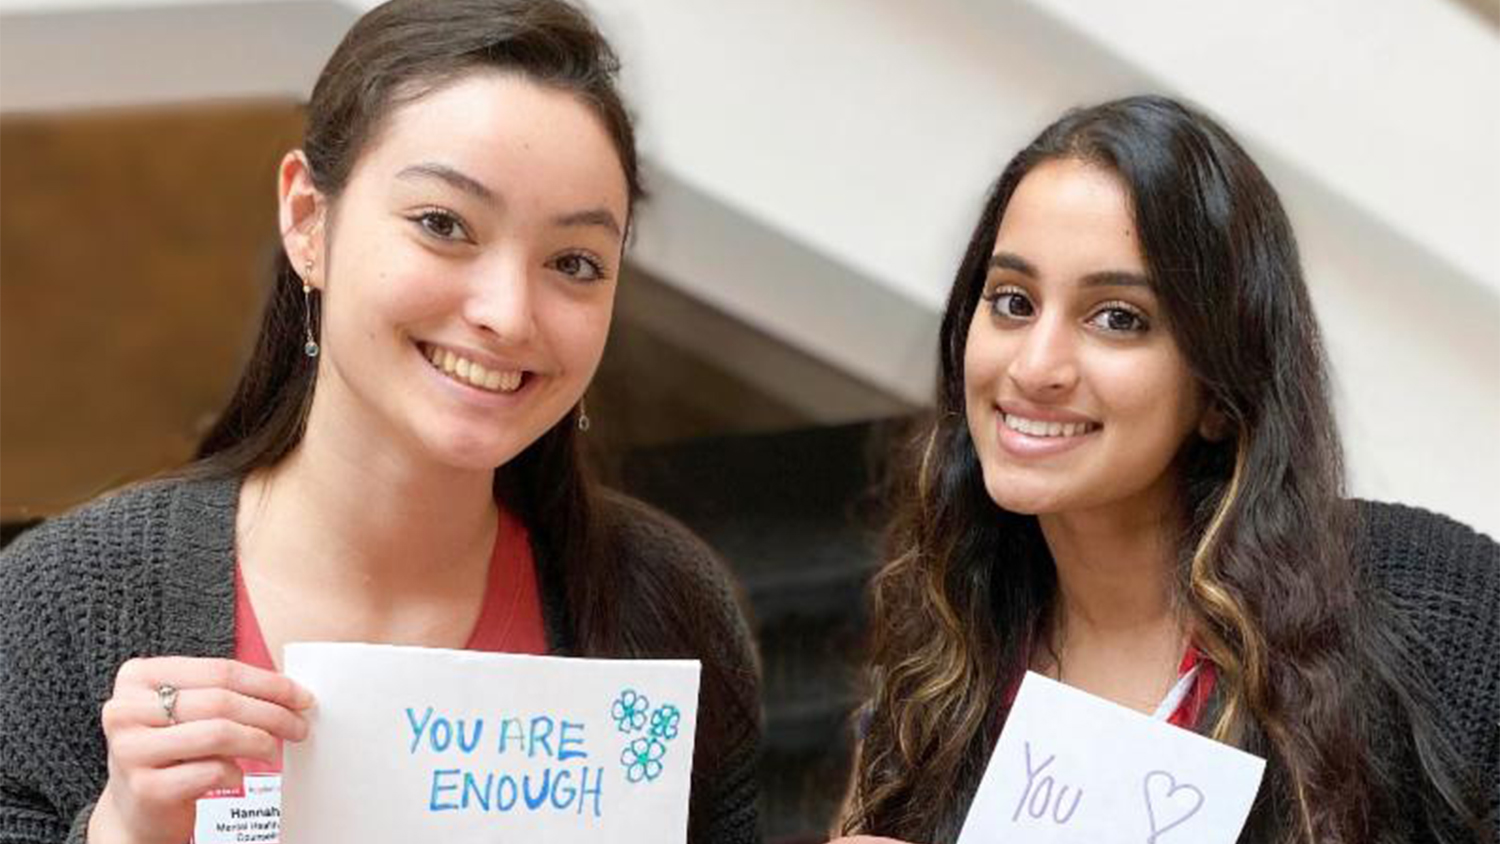 Two students hold signs with messages of encouragement